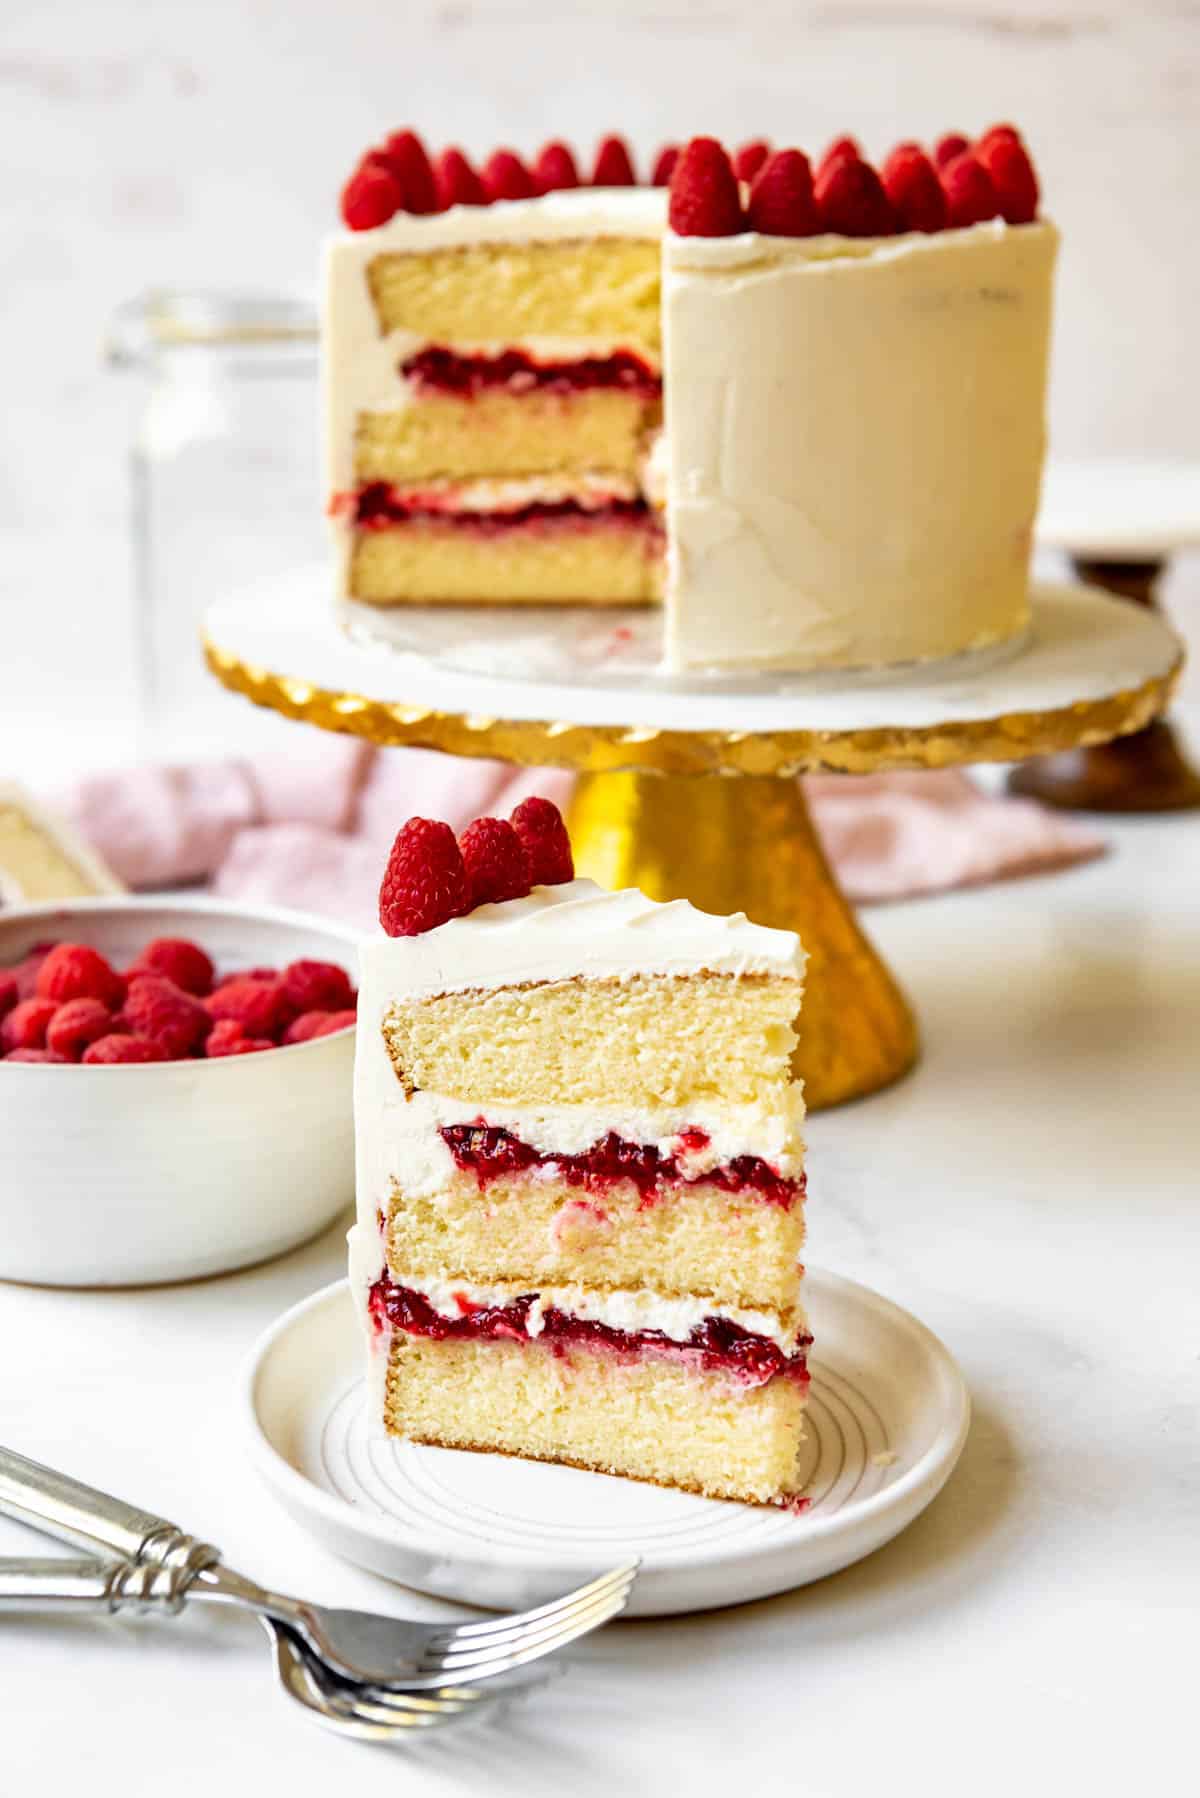 A slice of white chocolate raspberry cake standing on a plate in front of the rest of the cake on a cake stand.